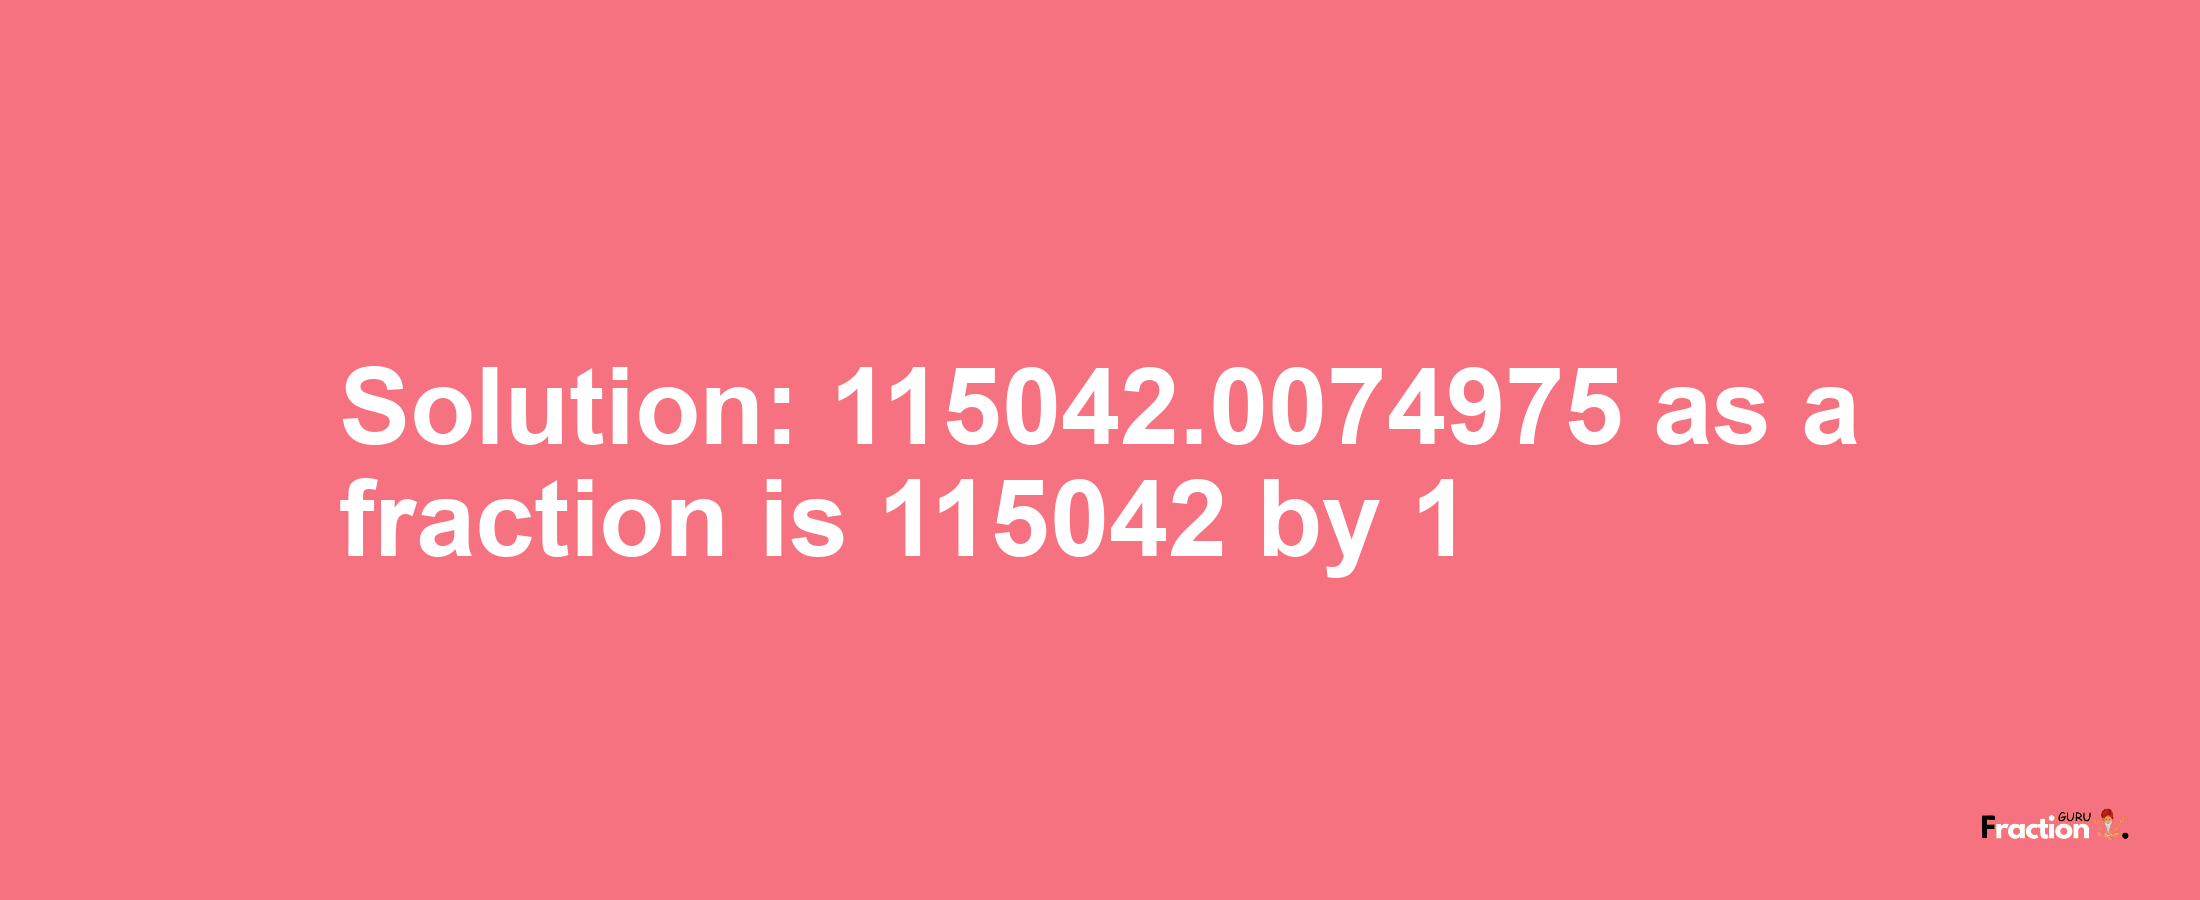 Solution:115042.0074975 as a fraction is 115042/1